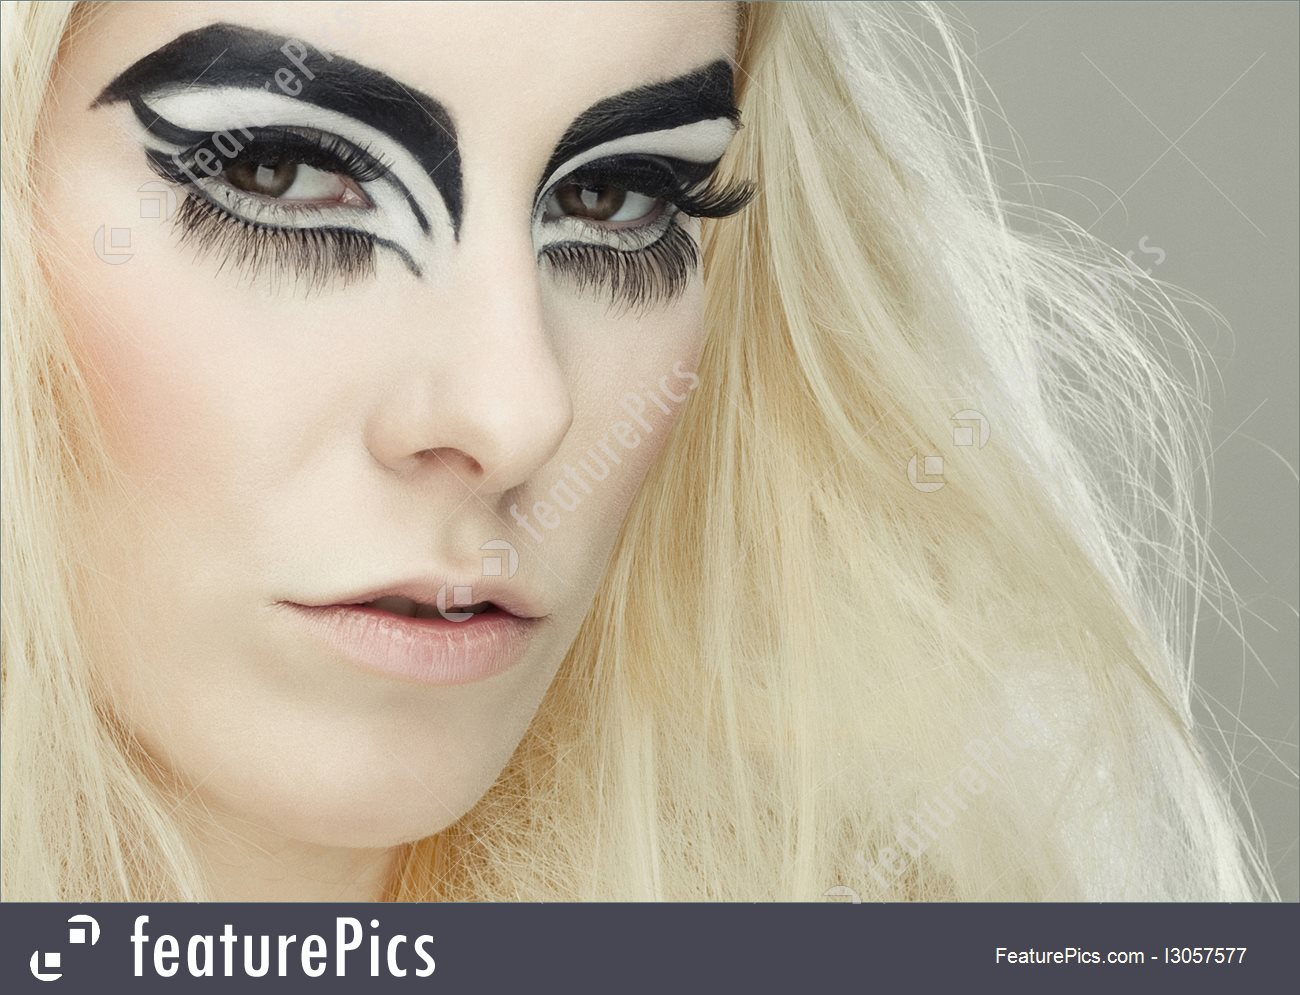 Black Cat Eye Makeup Body Art And Beauty Eye Makeup Stock Picture I3057577 At Featurepics